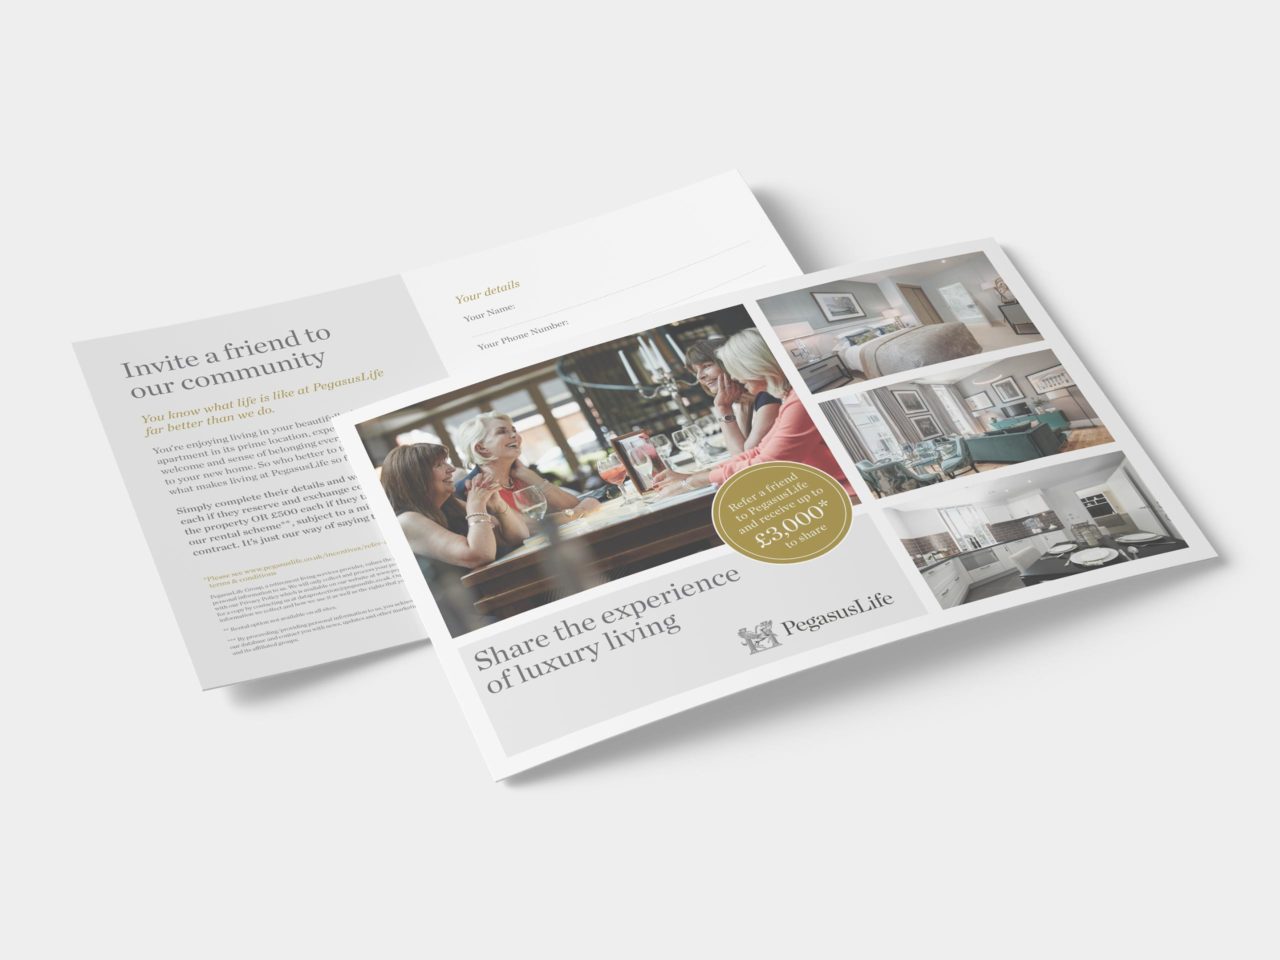 An image to show a printed leaflet for referring a friend. Contains lifestyle photography.